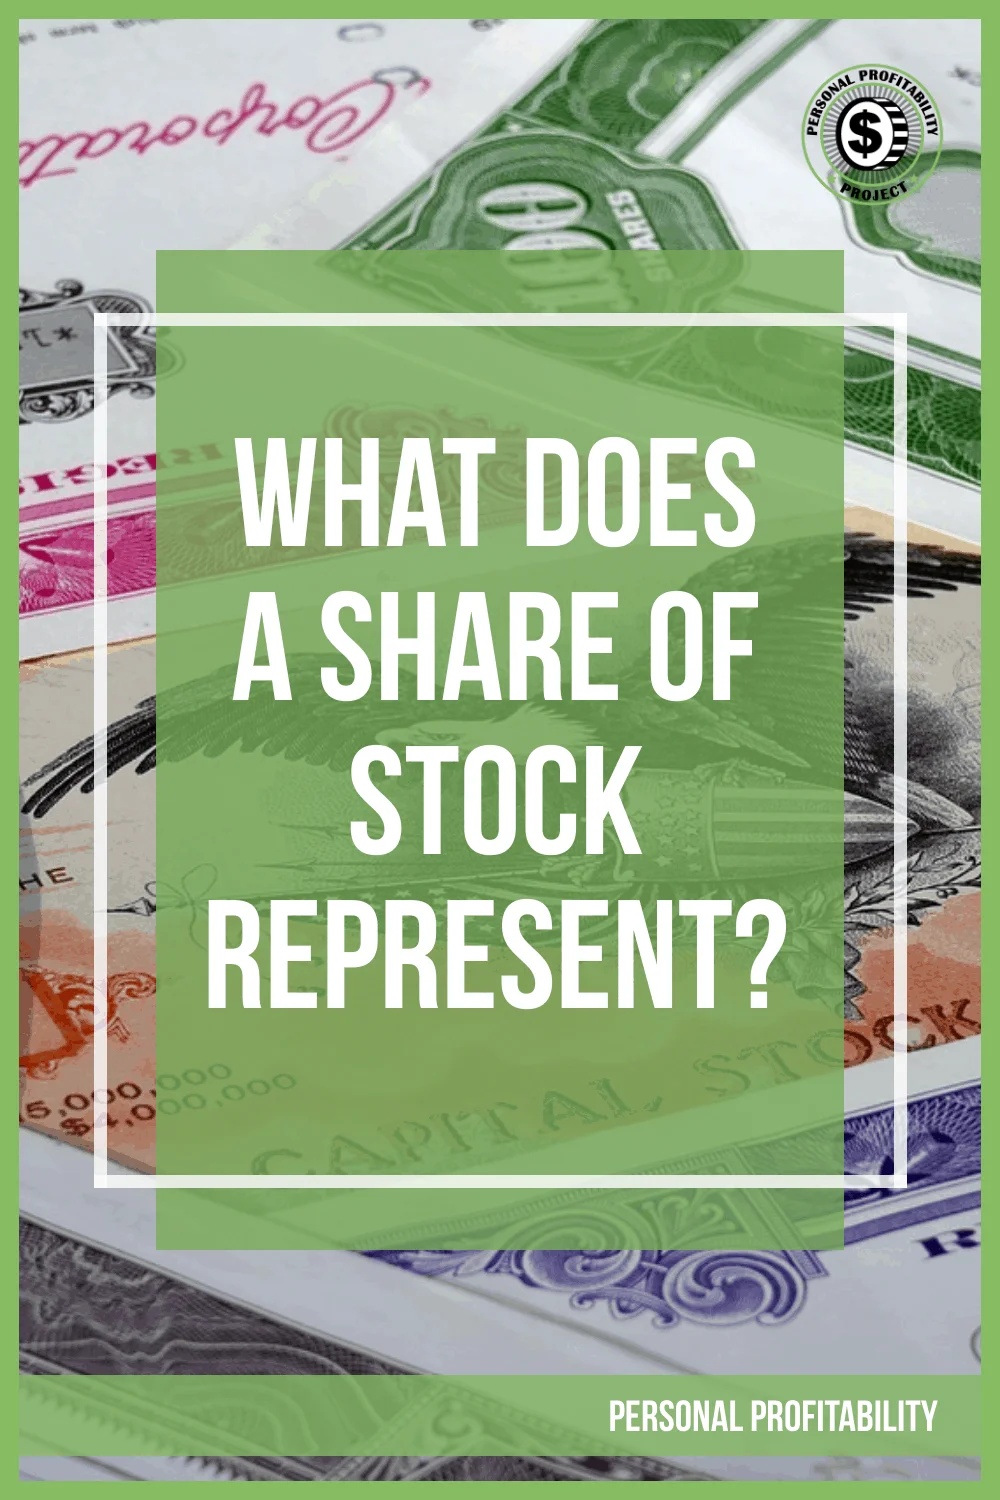 What Does a Share of Stock Represent?